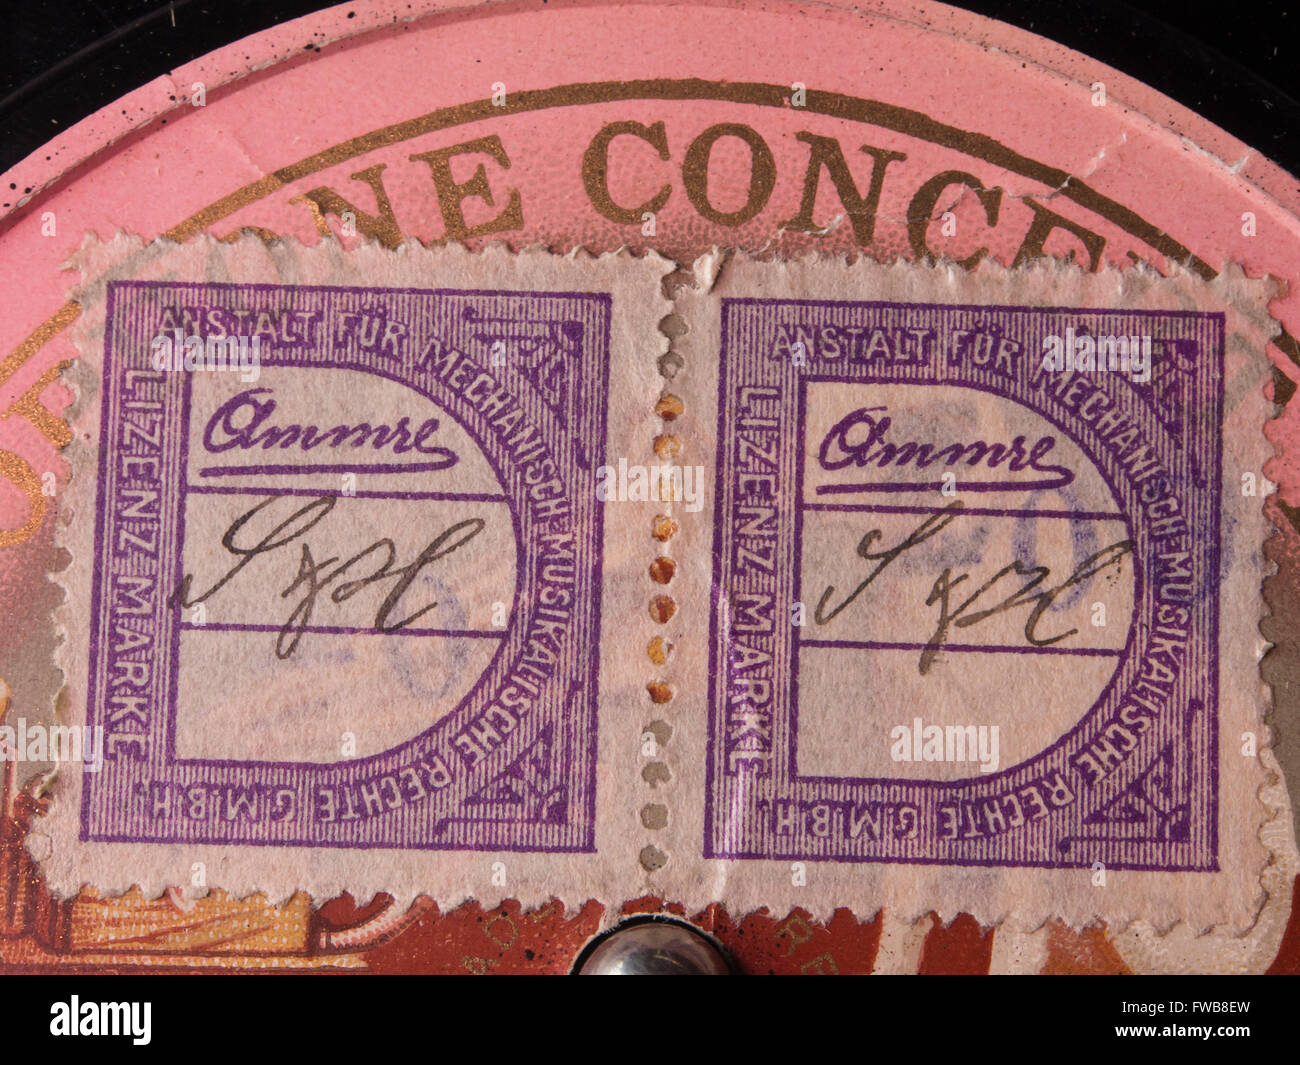 German copyright license stamps ,Mecanish Musikalishe Rechte Lizenz marke , on an old record Stock Photo